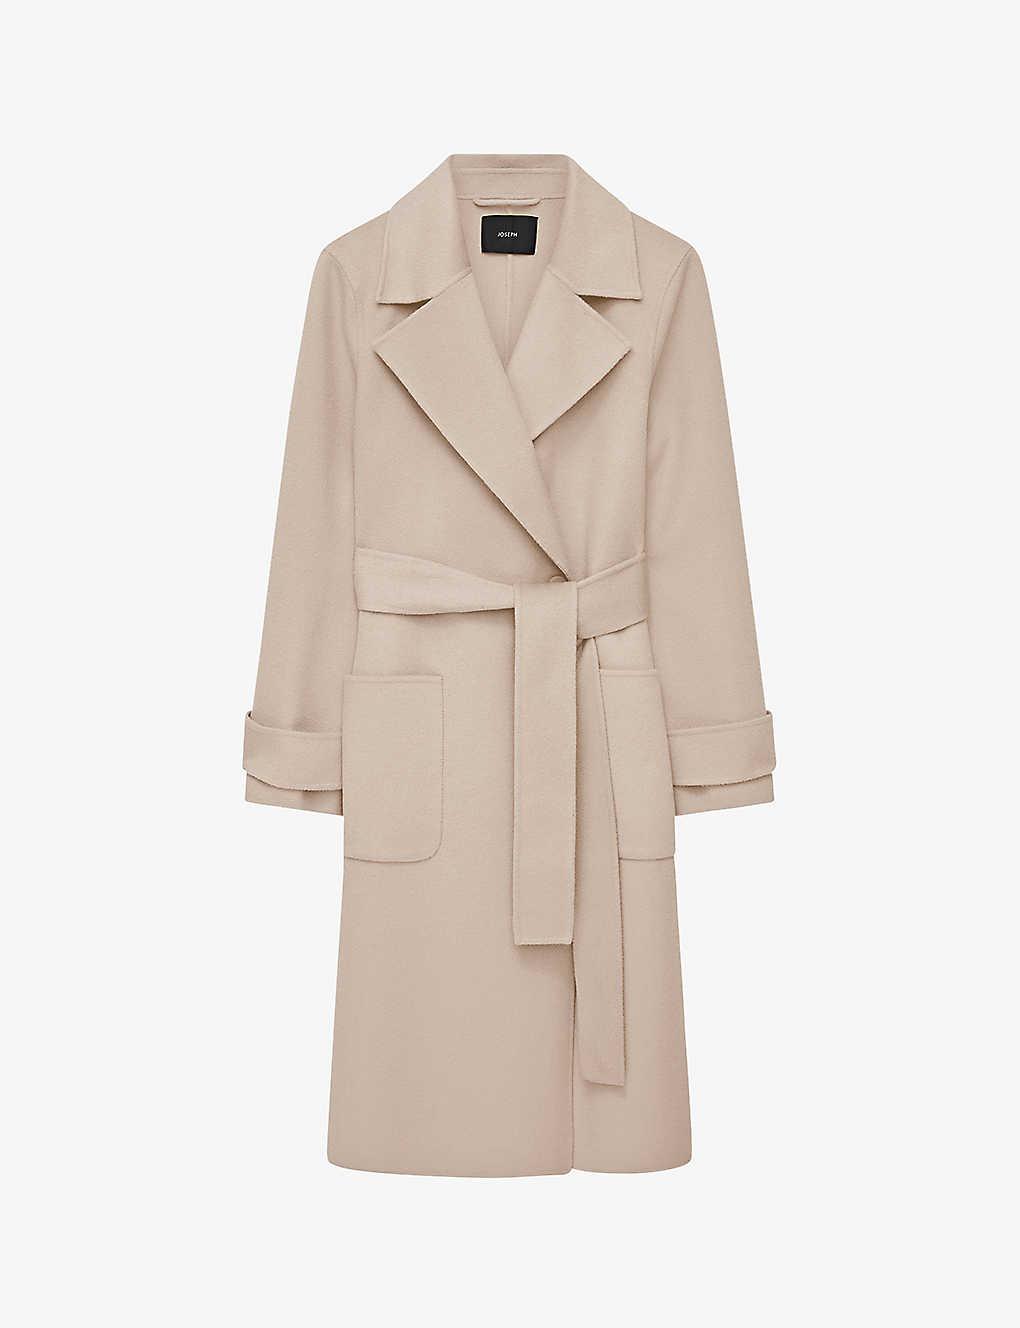 JOSEPH Arline Belted Wool And Cashmere-blend Coat in Natural